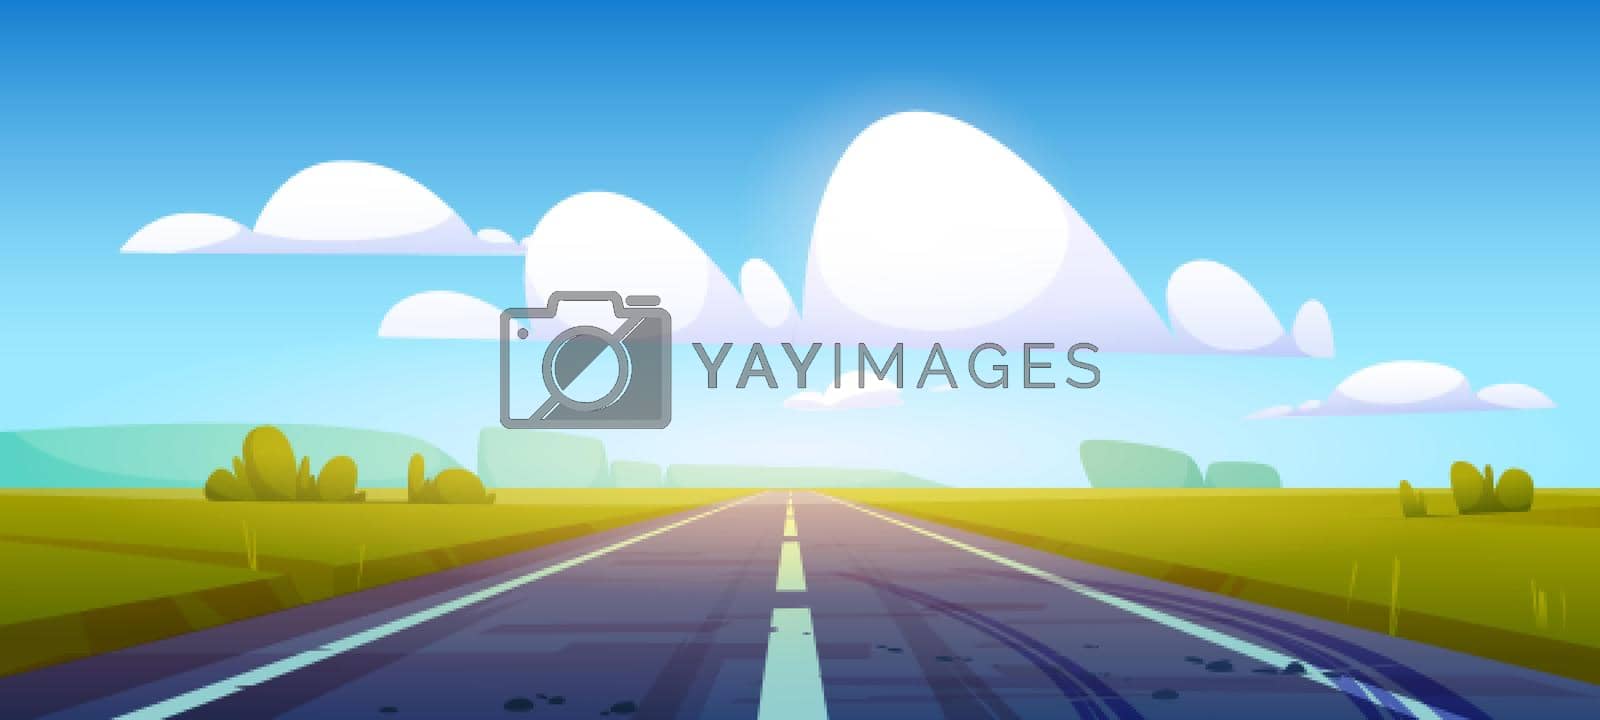 Car road in fields with green grass and forest on horizon. Vector cartoon illustration of summer countryside landscape with meadows, clouds in blue sky and highway with tire tracks on asphalt